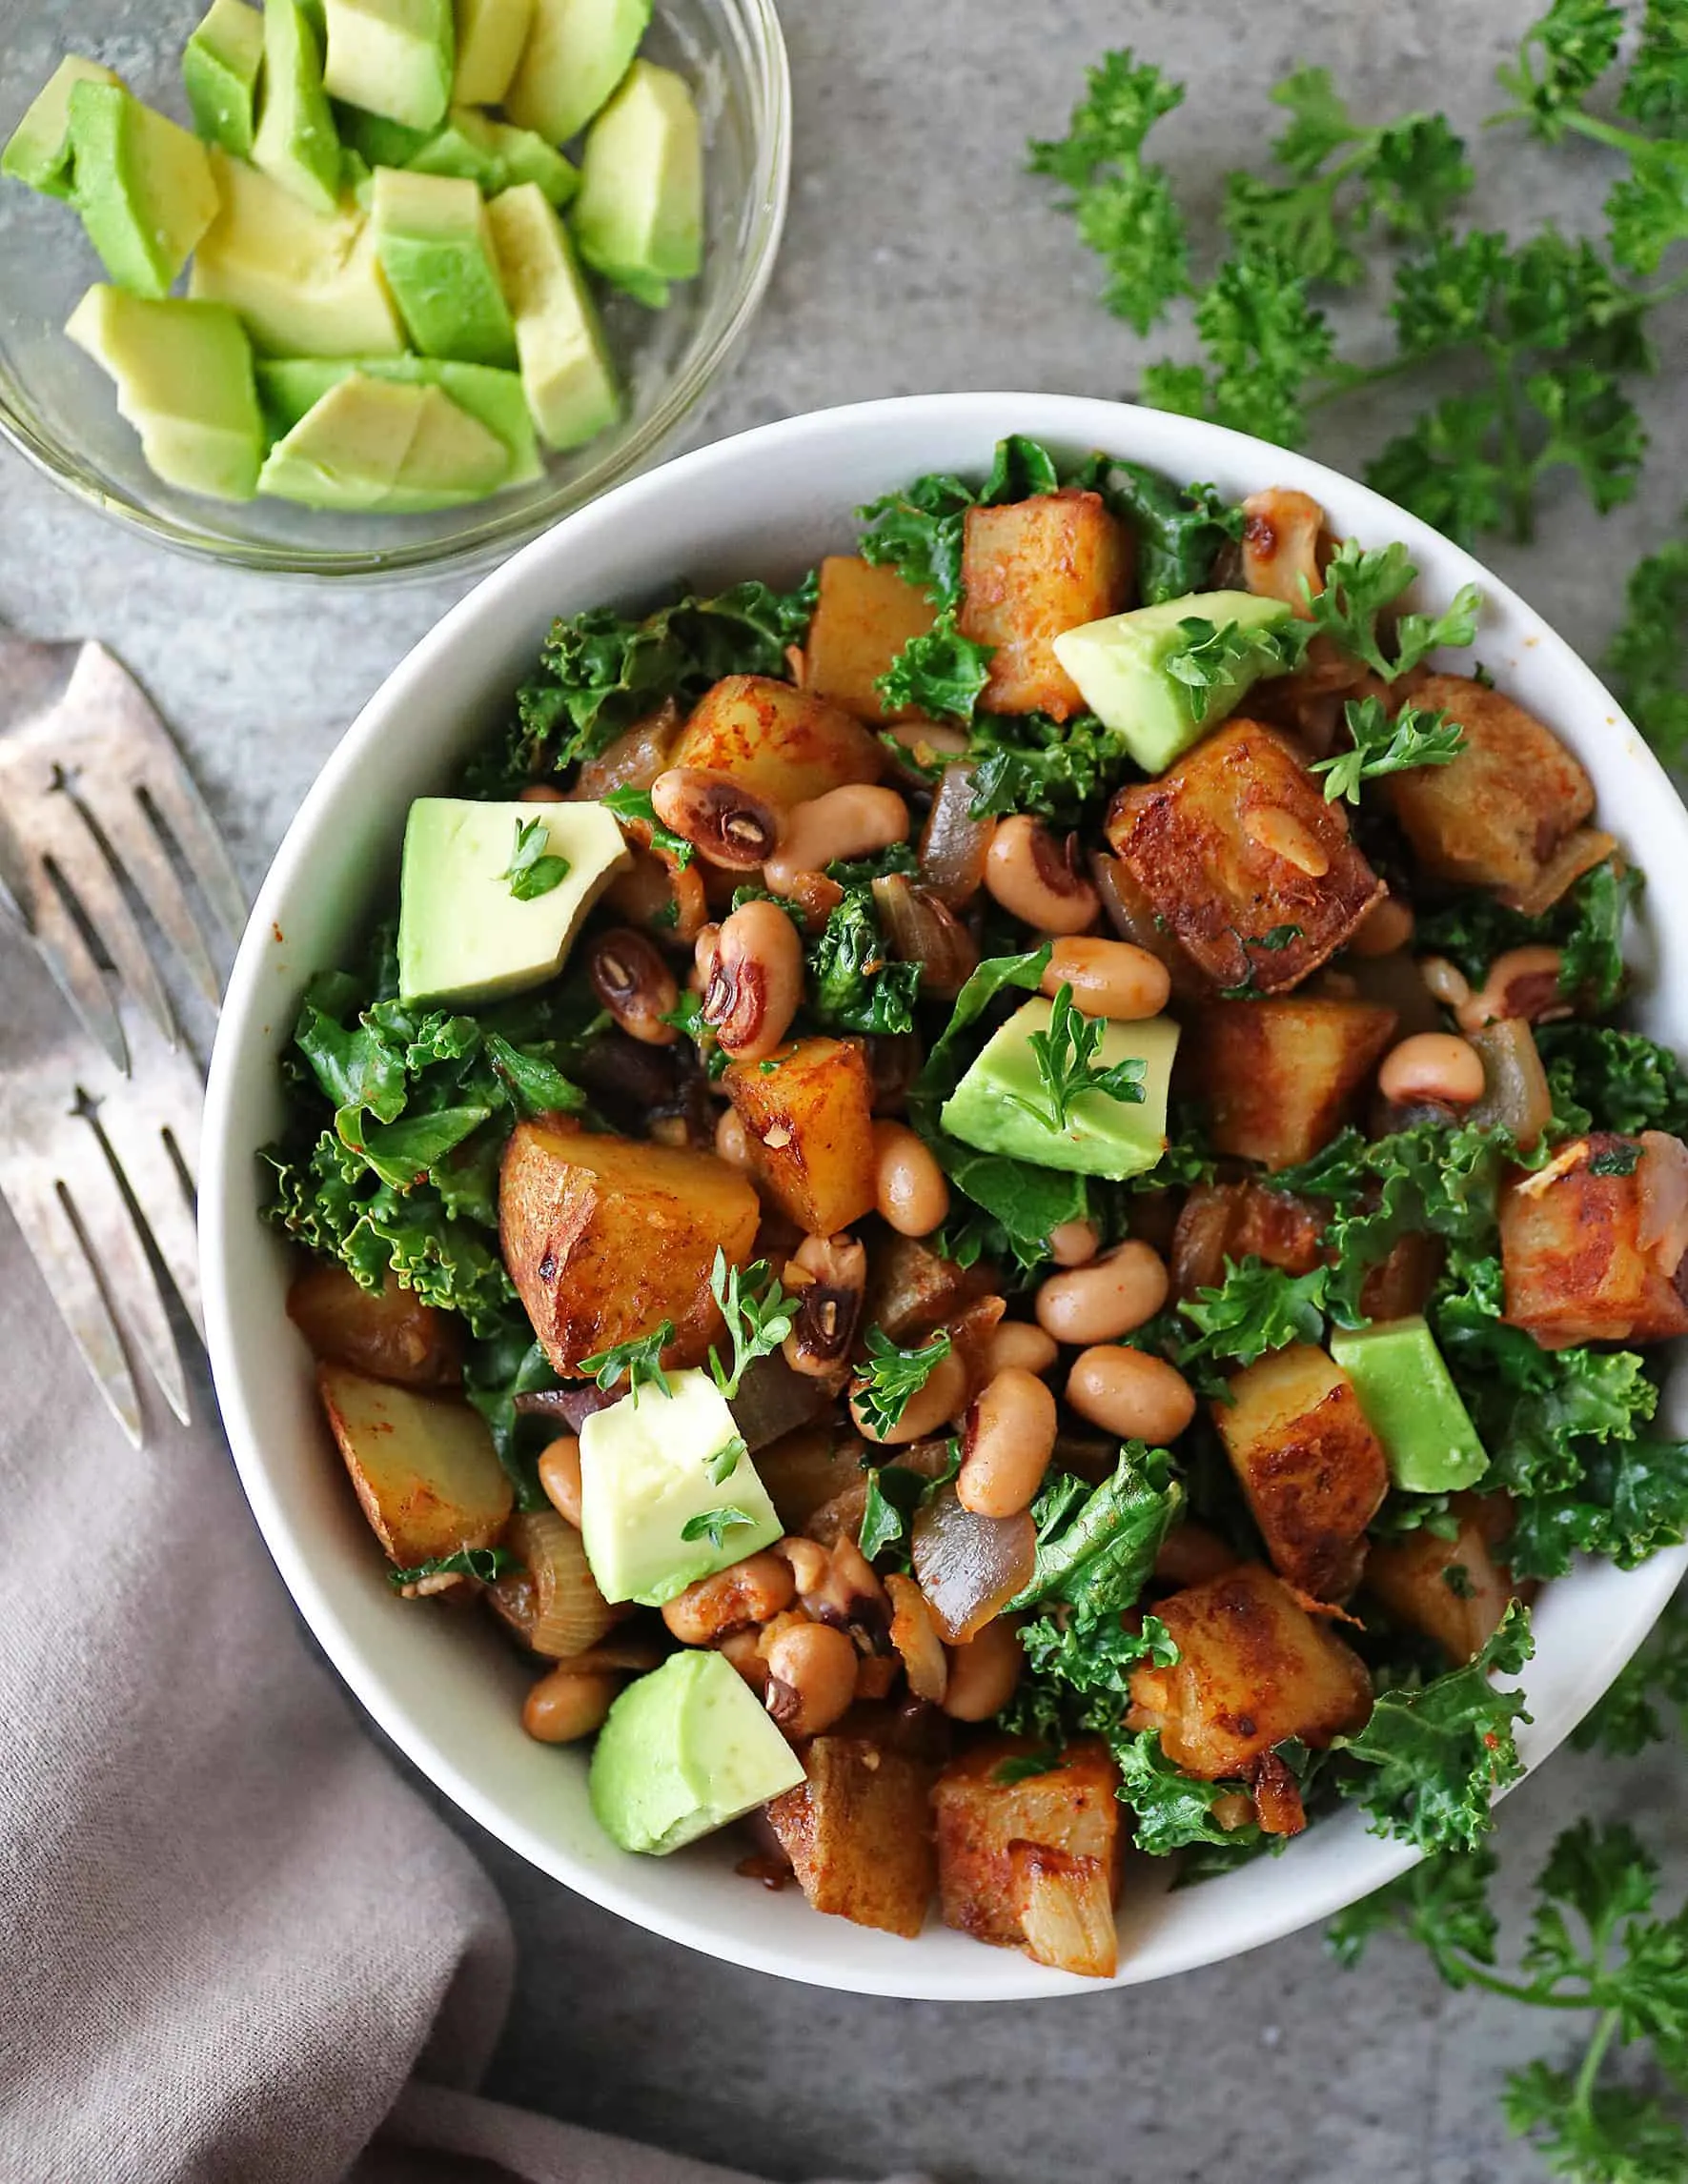 Vegan Black-Eyed Peas Recipe with Greens Hash in a bowl with a fork on the side.